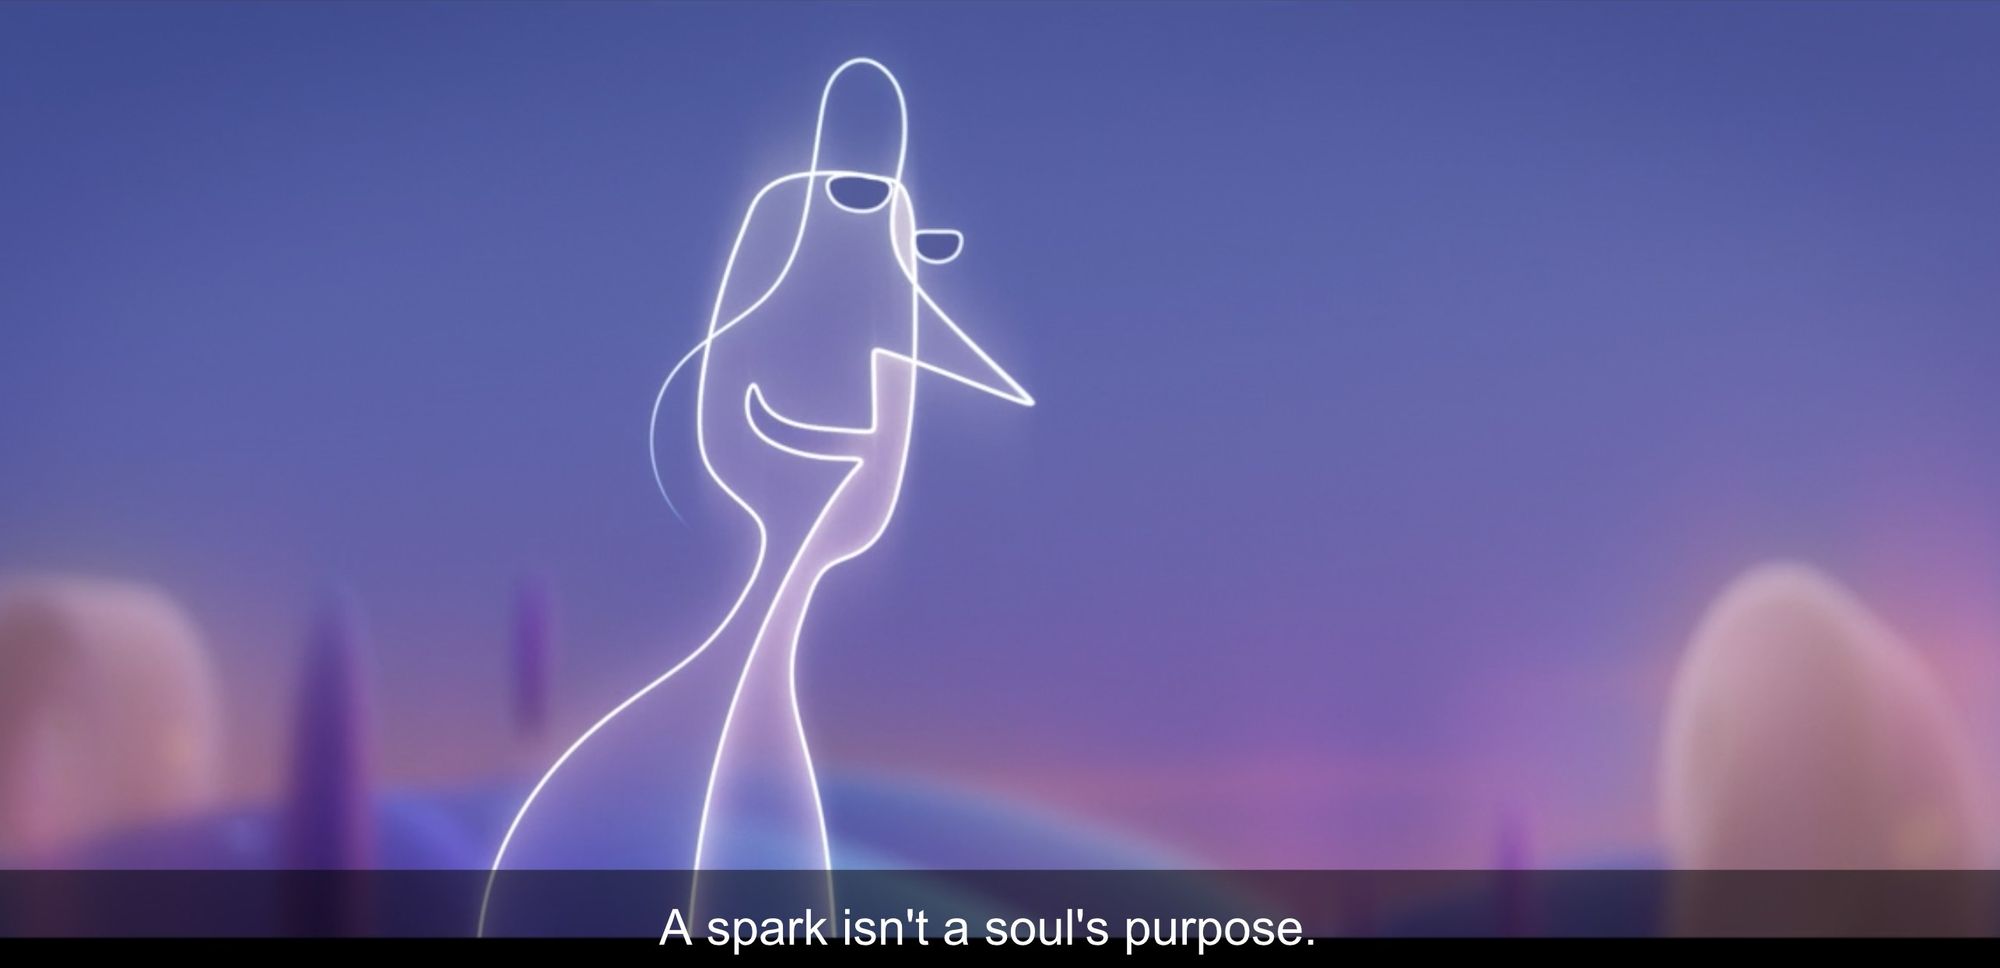 A photo of Jerry saying, "A spark isn't a soul's purpose."